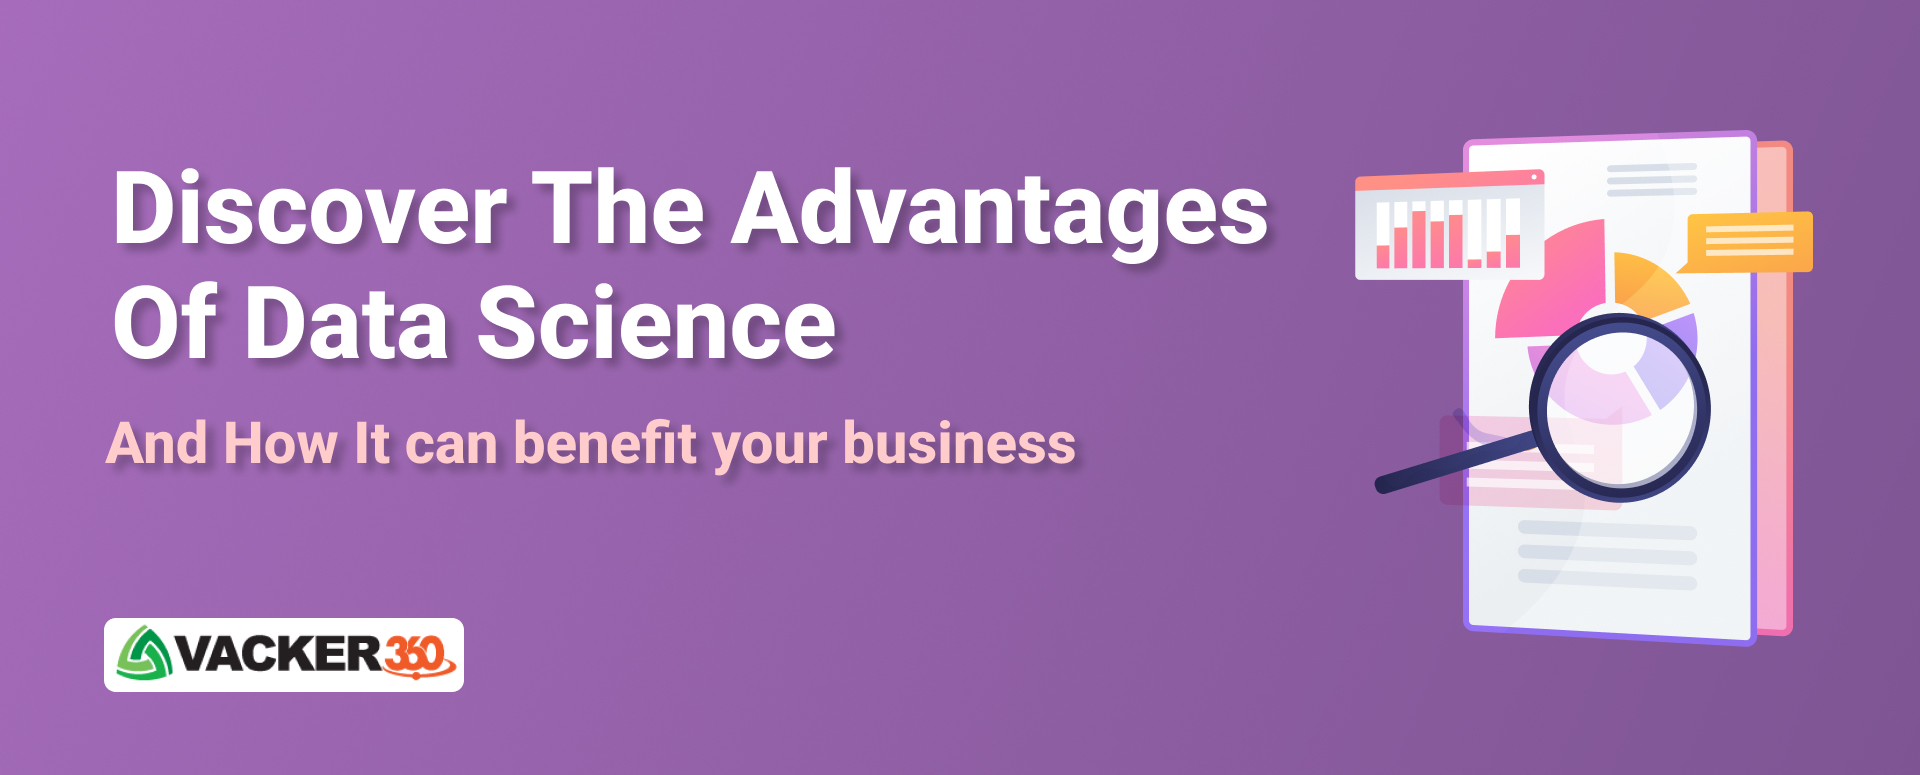 DISCOVER-THE-ADVANTAGES-OF-DATA-SCIENCE-AND-HOW-IT-CAN-BENEFIT-YOUR-BUSINESS